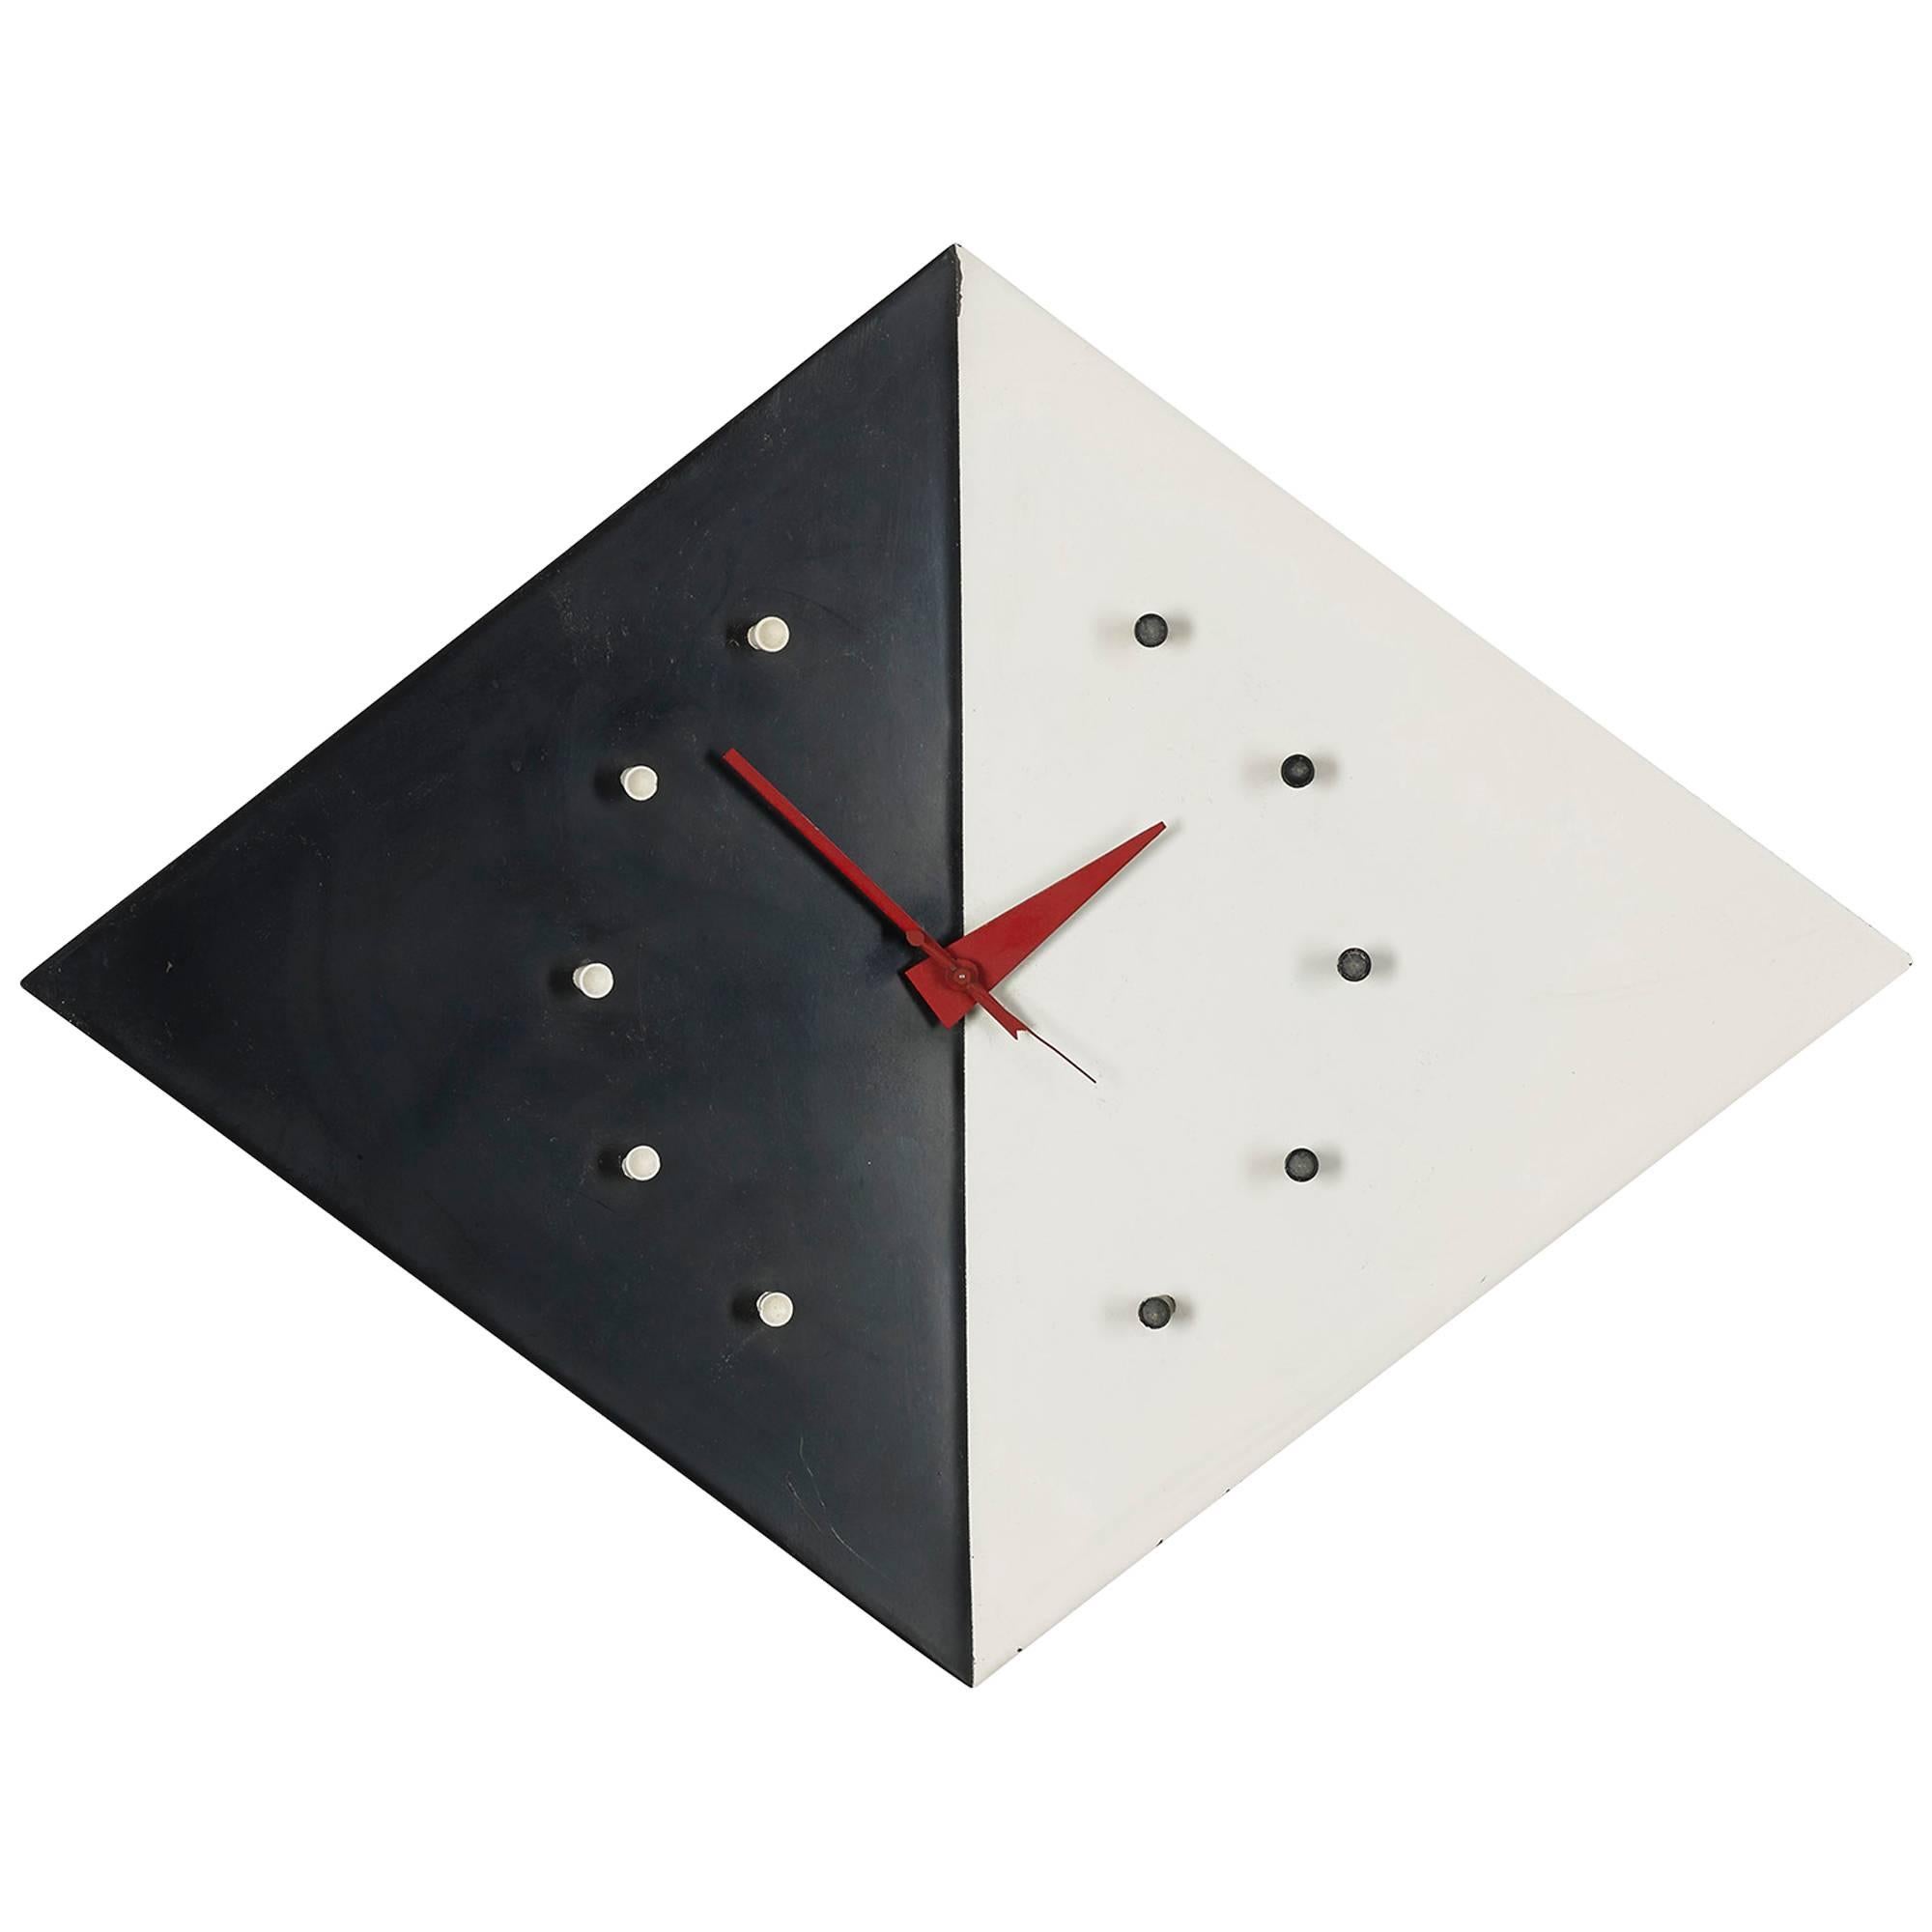 Kite Wall Clock, Model 2201d by George Nelson & Associates For Sale